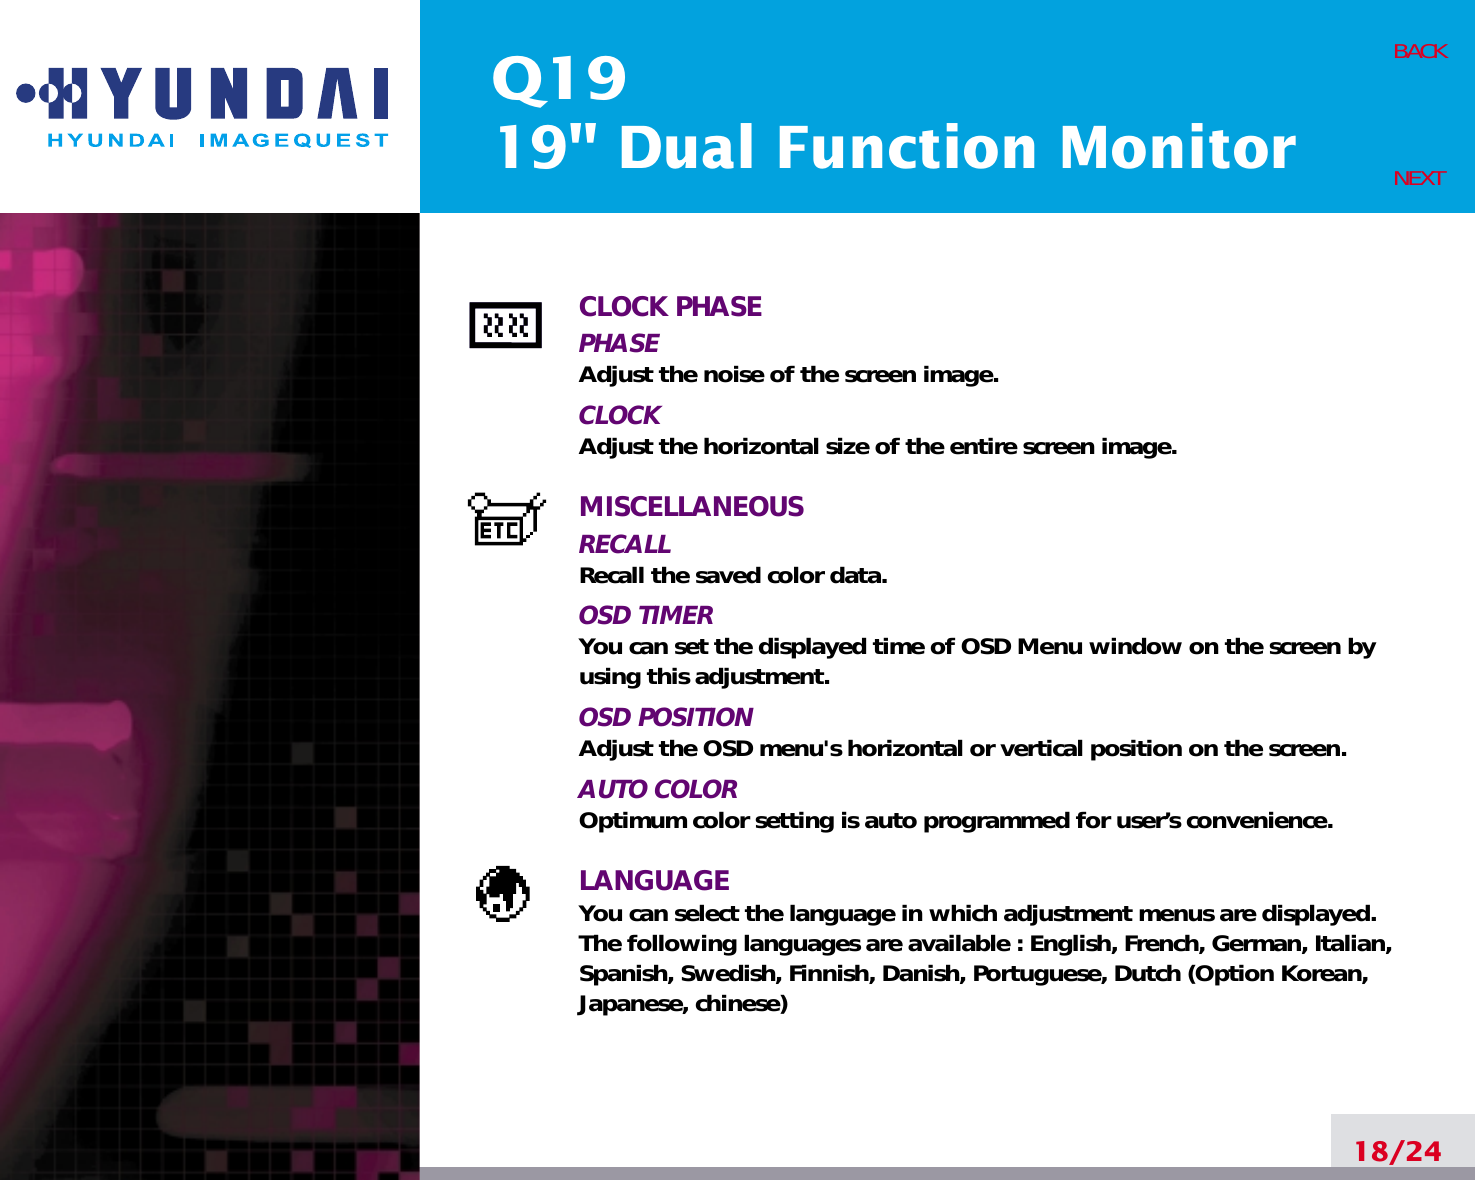 Q1919&quot; Dual Function Monitor18/24BACKNEXTCLOCK PHASEPHASEAdjust the noise of the screen image.CLOCKAdjust the horizontal size of the entire screen image.MISCELLANEOUSRECALL Recall the saved color data.OSD TIMERYou can set the displayed time of OSD Menu window on the screen byusing this adjustment.OSD POSITIONAdjust the OSD menu&apos;s horizontal or vertical position on the screen.AUTO COLOROptimum color setting is auto programmed for user’s convenience.LANGUAGEYou can select the language in which adjustment menus are displayed.The following languages are available : English, French, German, Italian,Spanish, Swedish, Finnish, Danish, Portuguese, Dutch (Option Korean,Japanese, chinese)